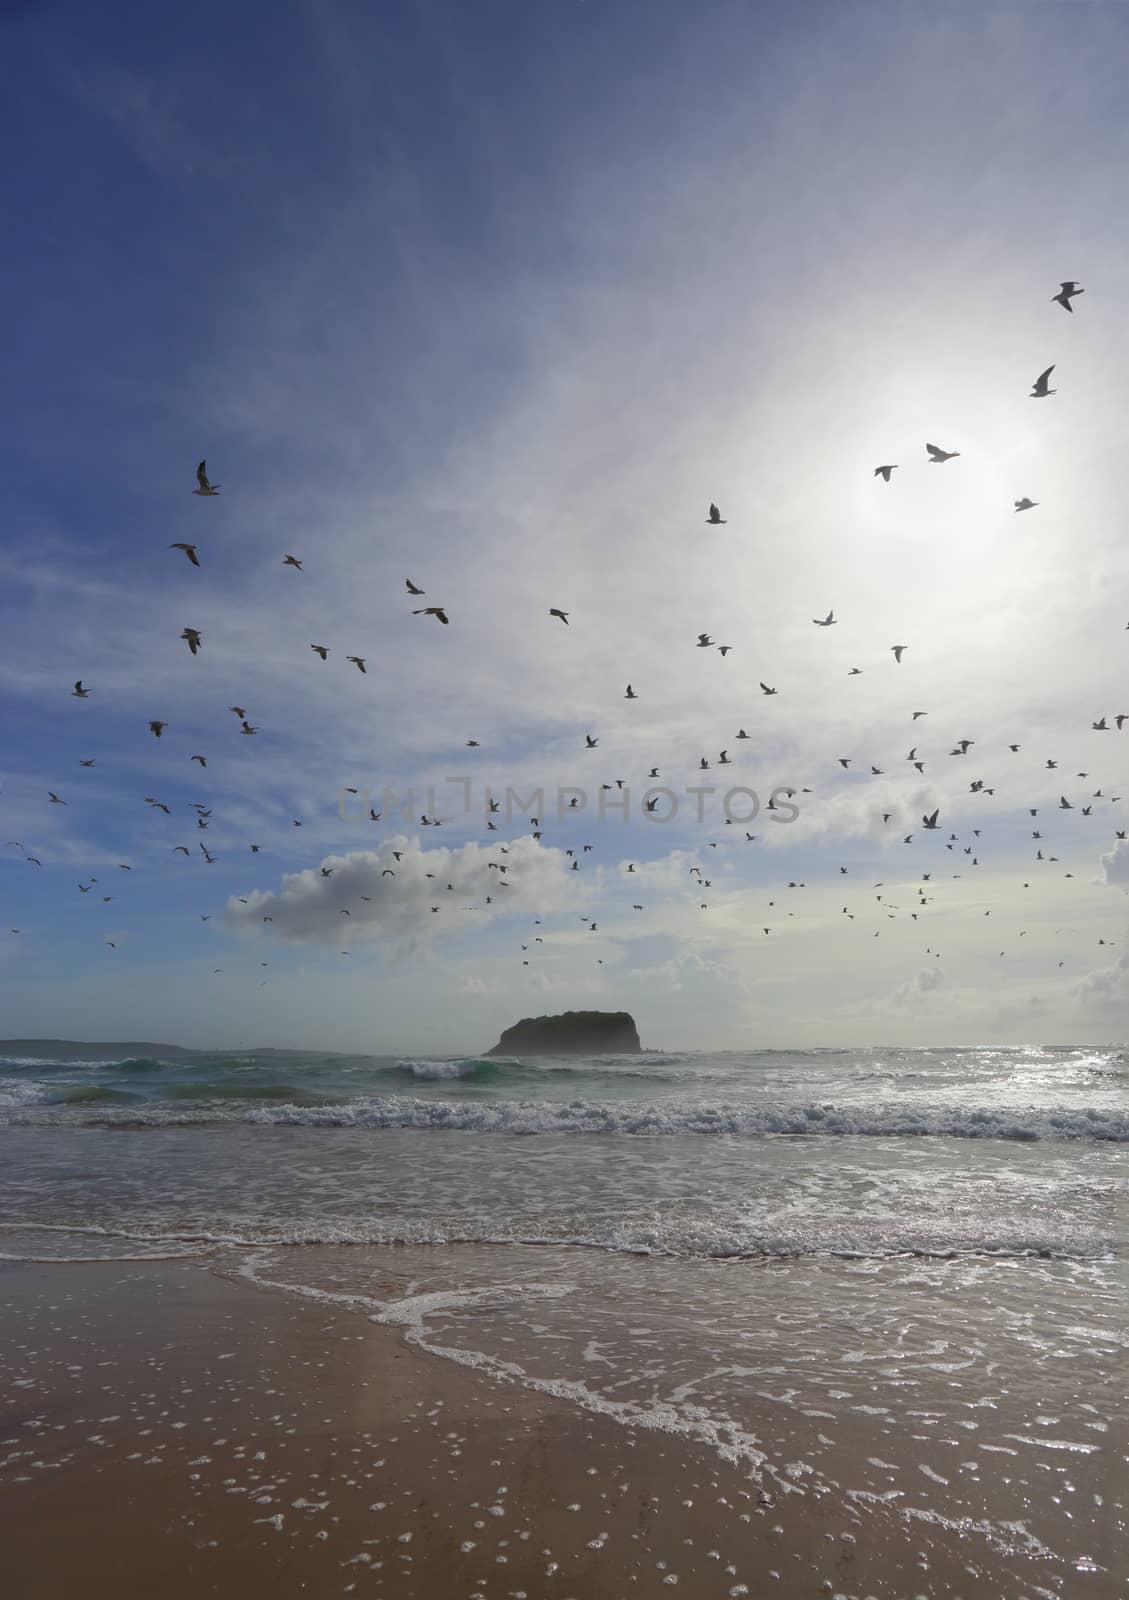 Seagulls fly overhead at Mystics Beach in Killalea State Park on the south coast of NSW Australia.  The sights and sounds of a summers morning